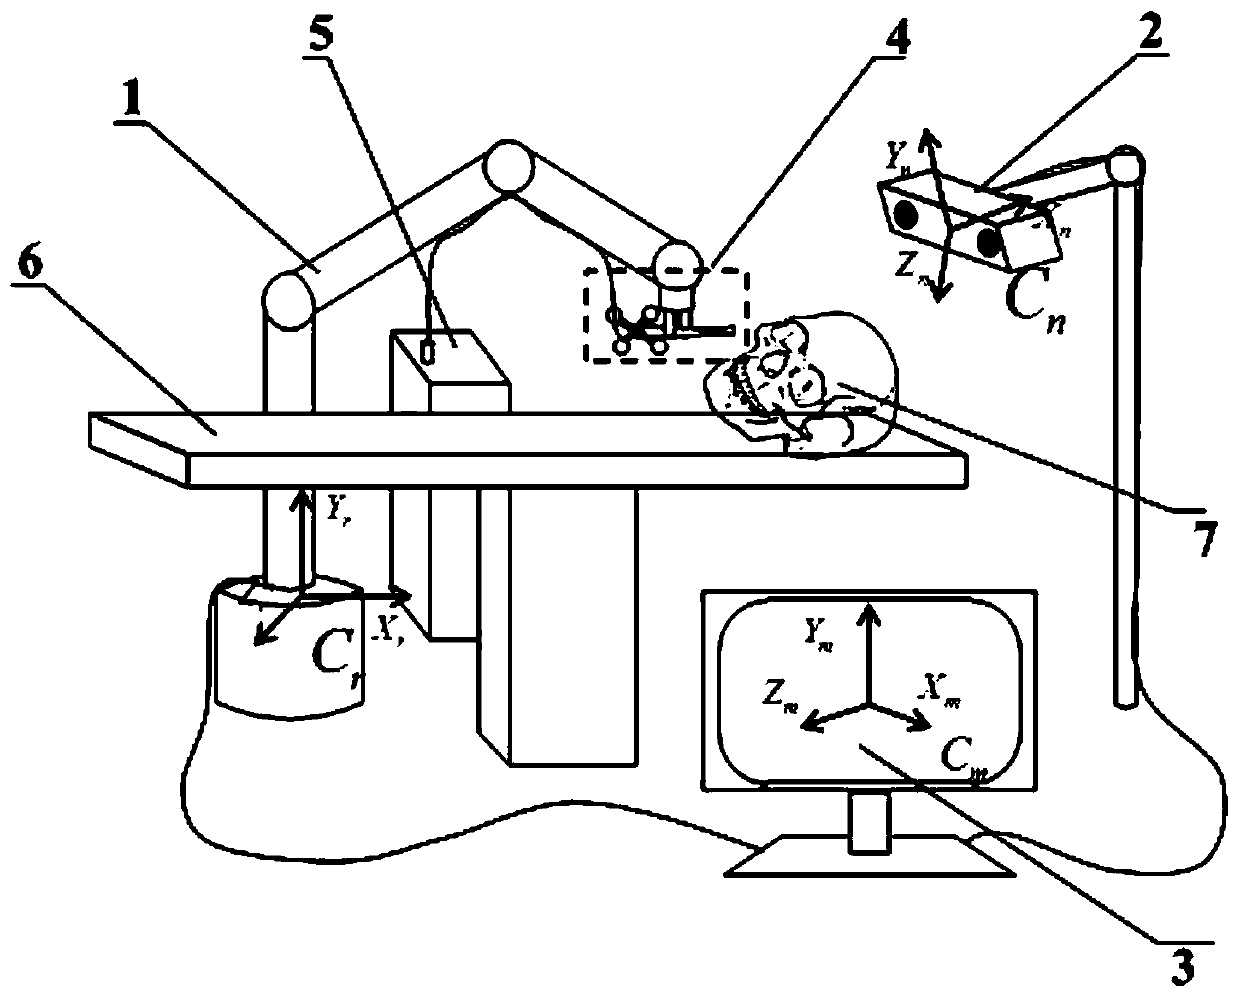 A robot system for laser osteotomy surgery and its path planning method